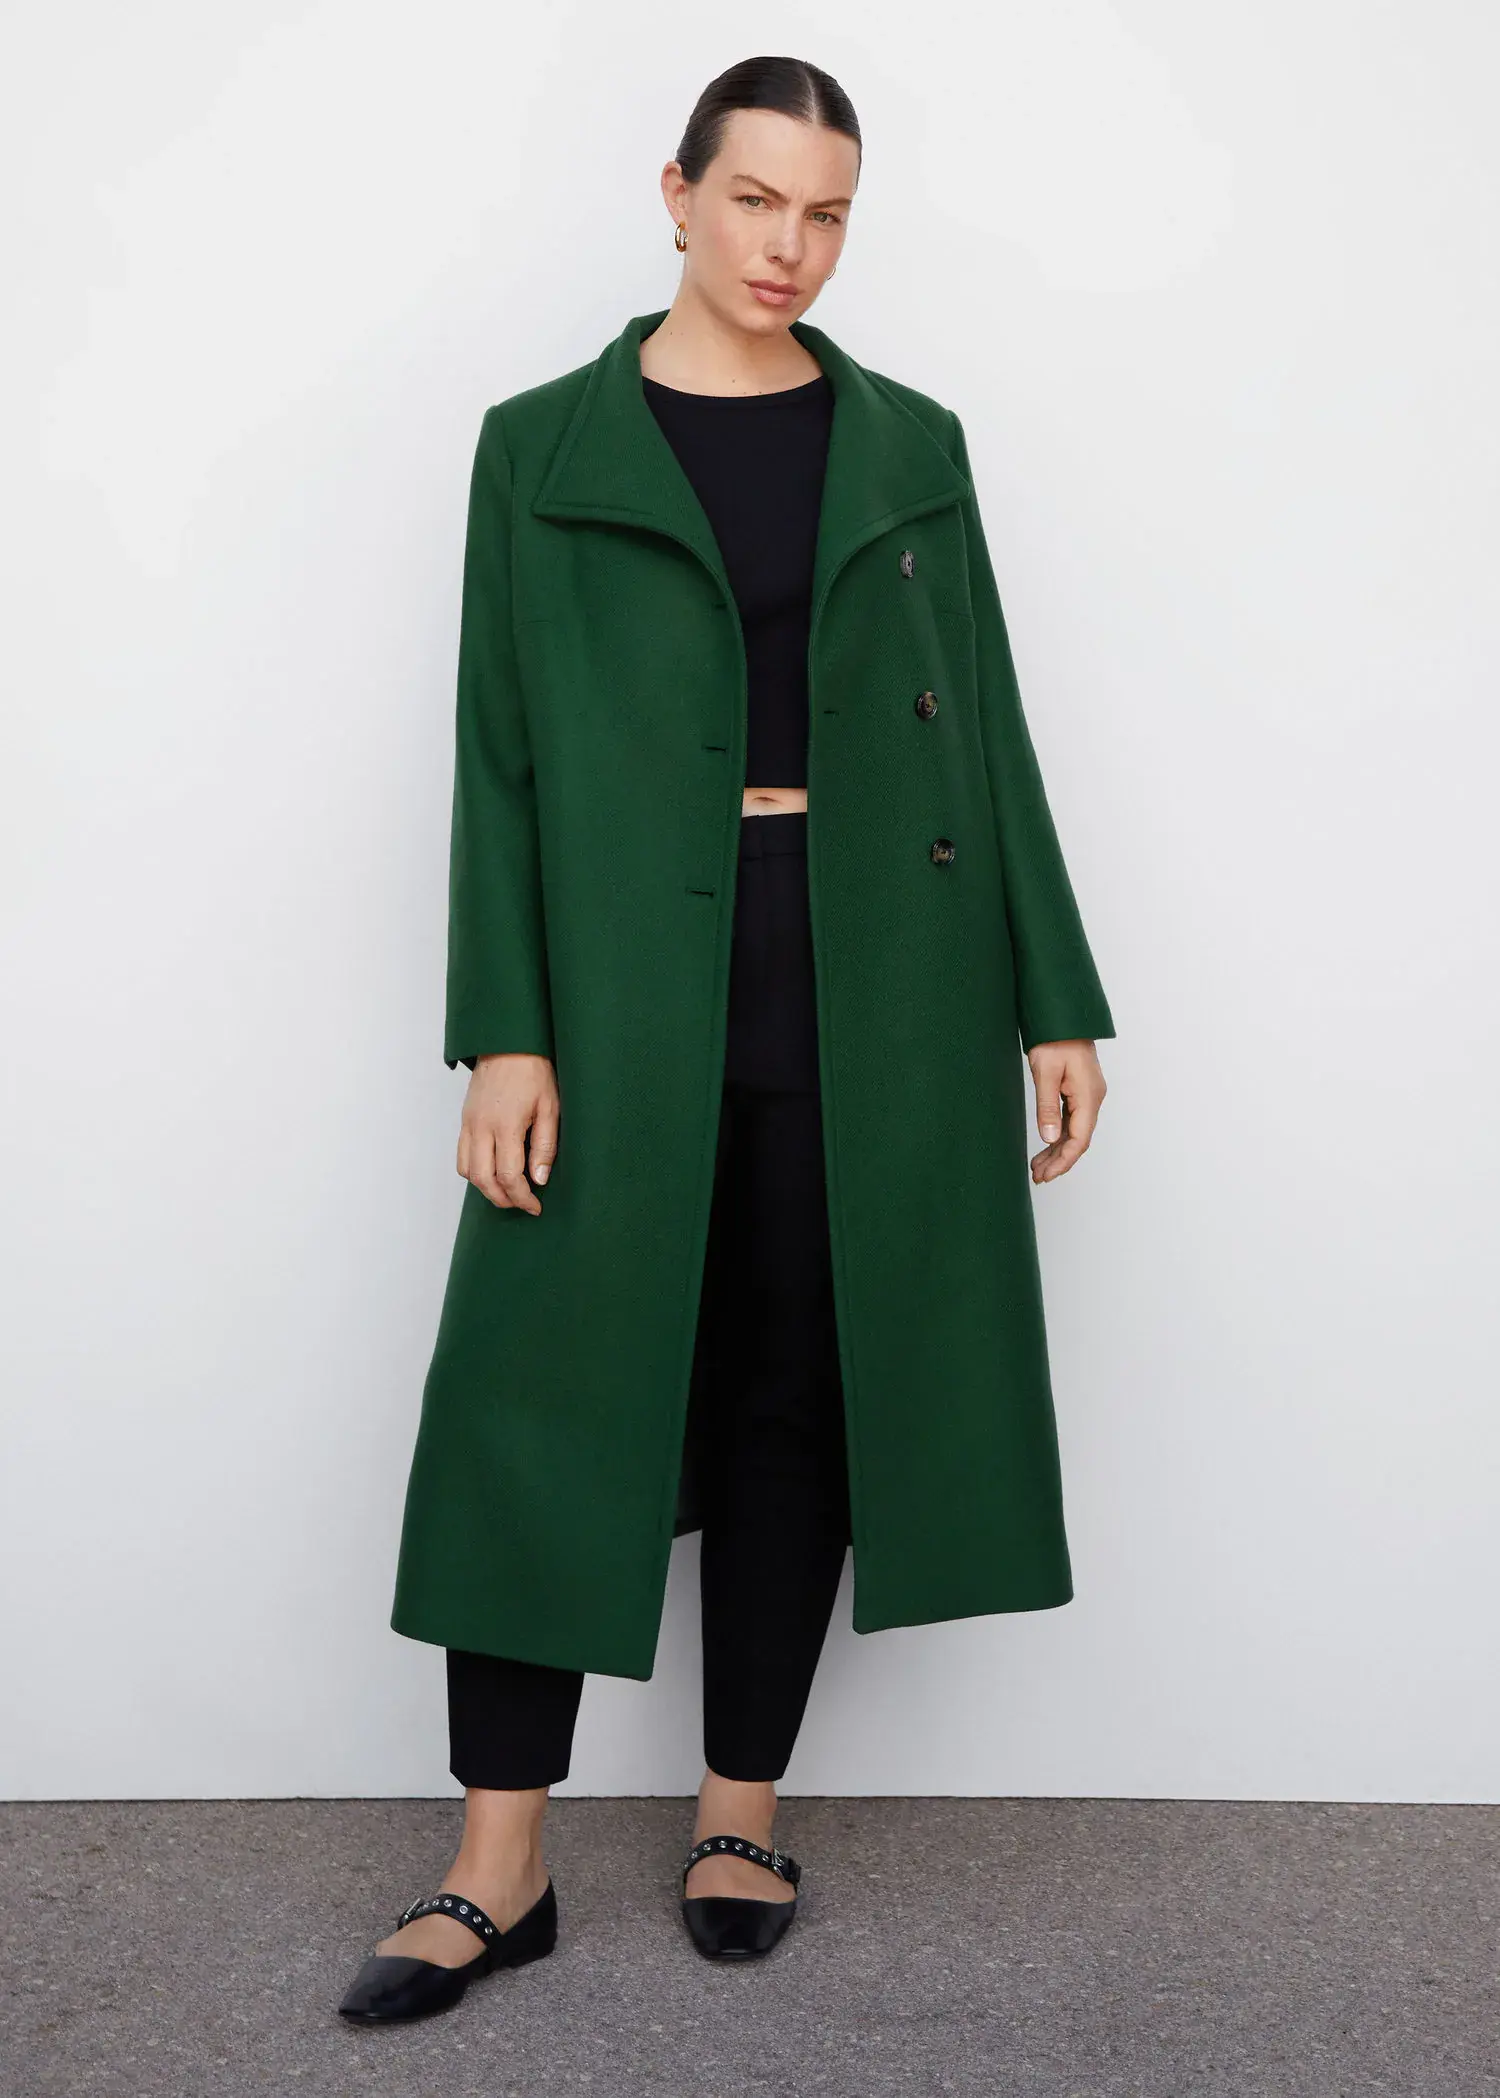 Mango Woollen coat with belt. a woman wearing a long green coat standing in front of a white wall. 